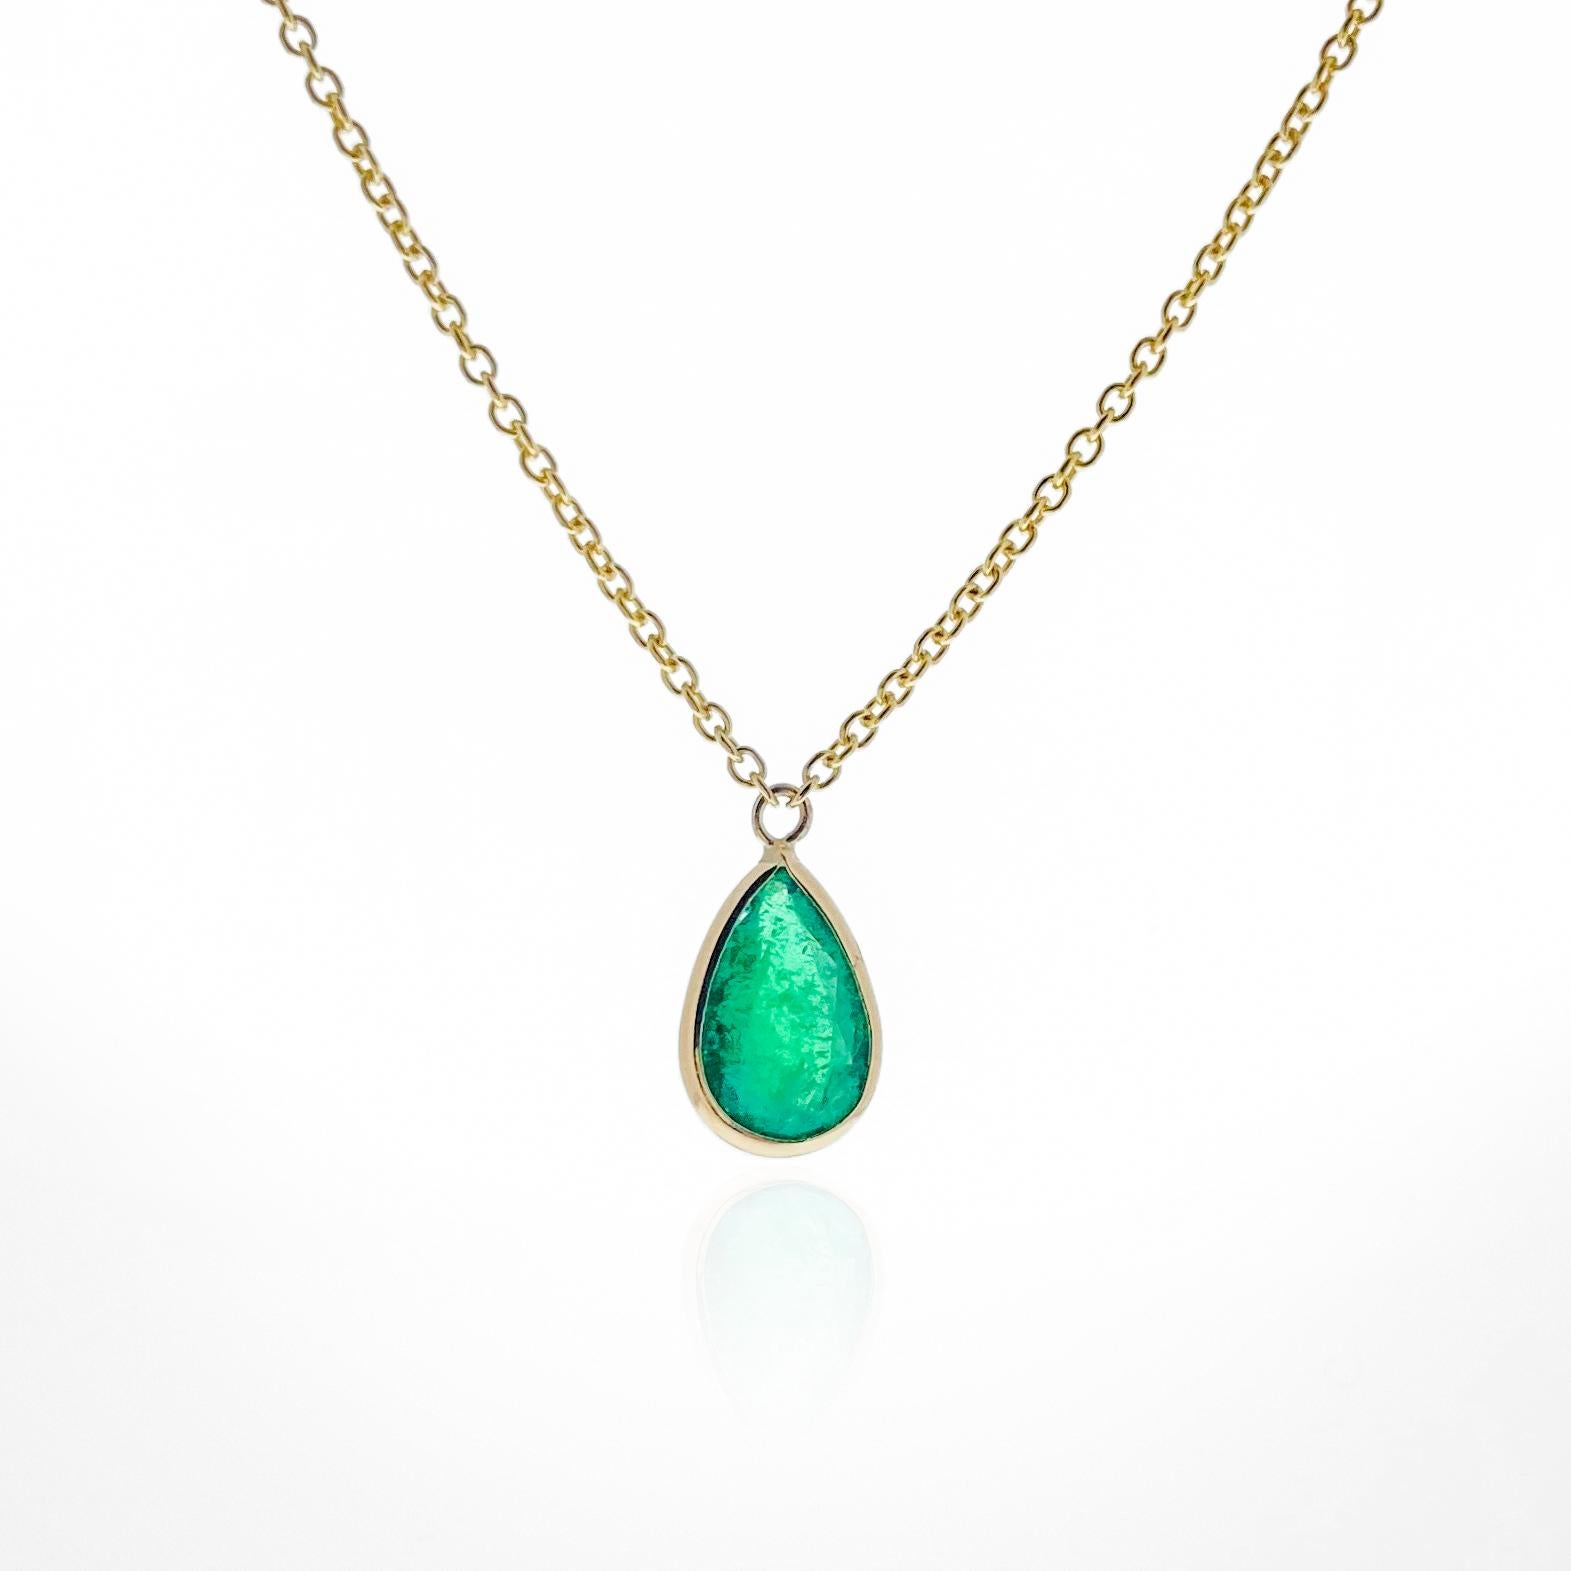 Contemporary 1.10 Carat Green Emerald Pear Shape Fashion Necklaces In 14K Yellow Gold For Sale